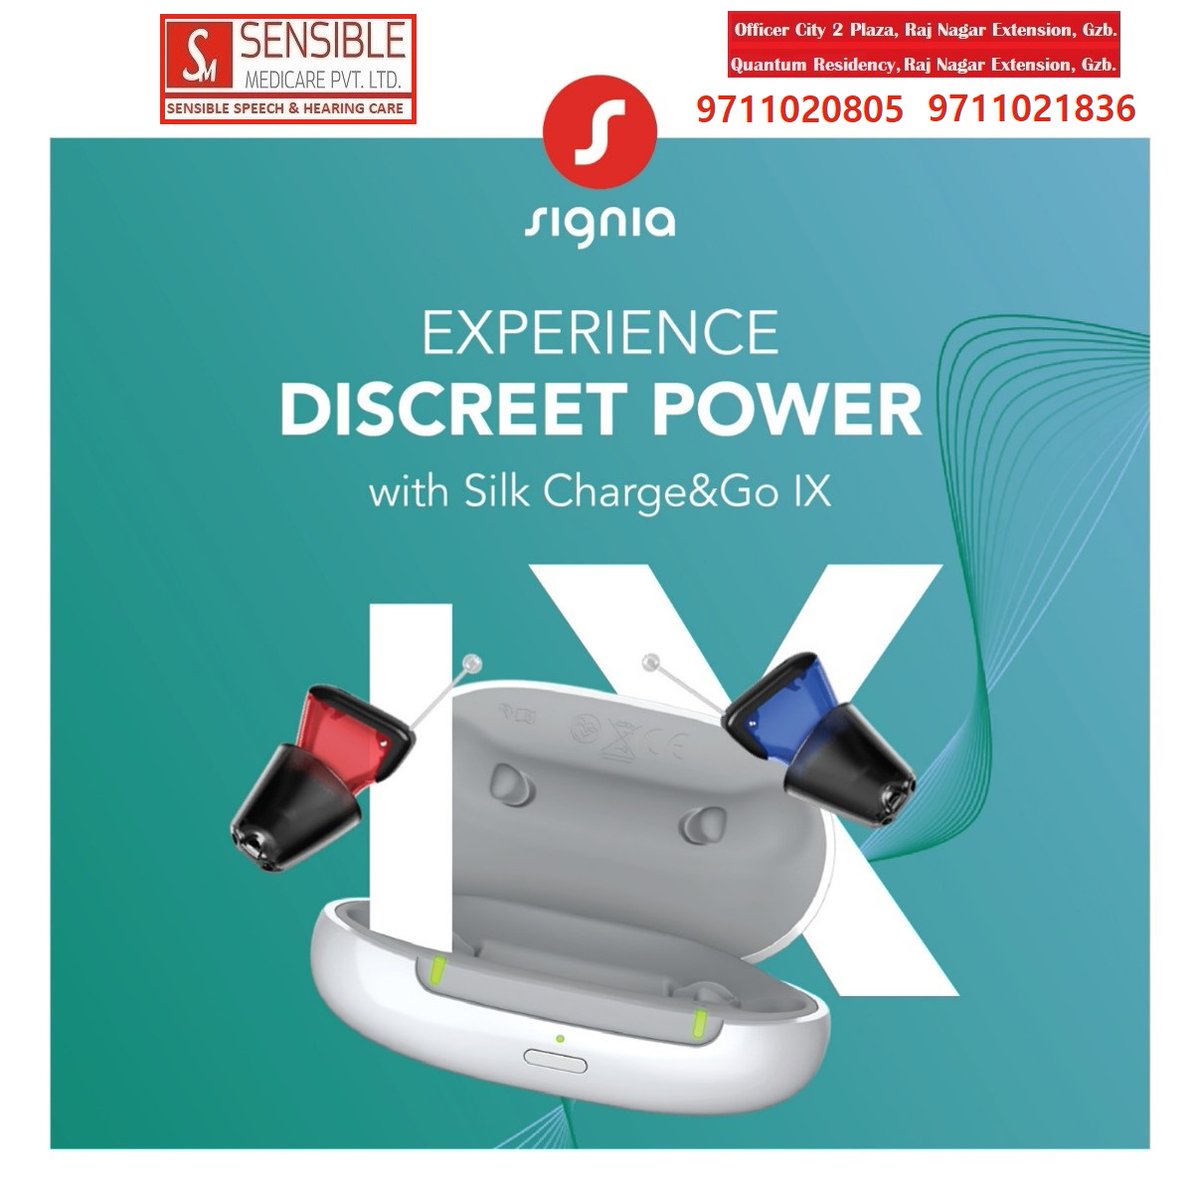 Experience the discreet power with #Signia #SilkChargeAndGoIX. #Call us @9711020805, 9711021836 & get the #benefits
#hearingloss #hearinglossawareness #hearinglossprevention #hearingaidaccessories #hearingaidbatteries #hearingaidtips #hearingaidcosts #hearingaid #hearingaidrepair